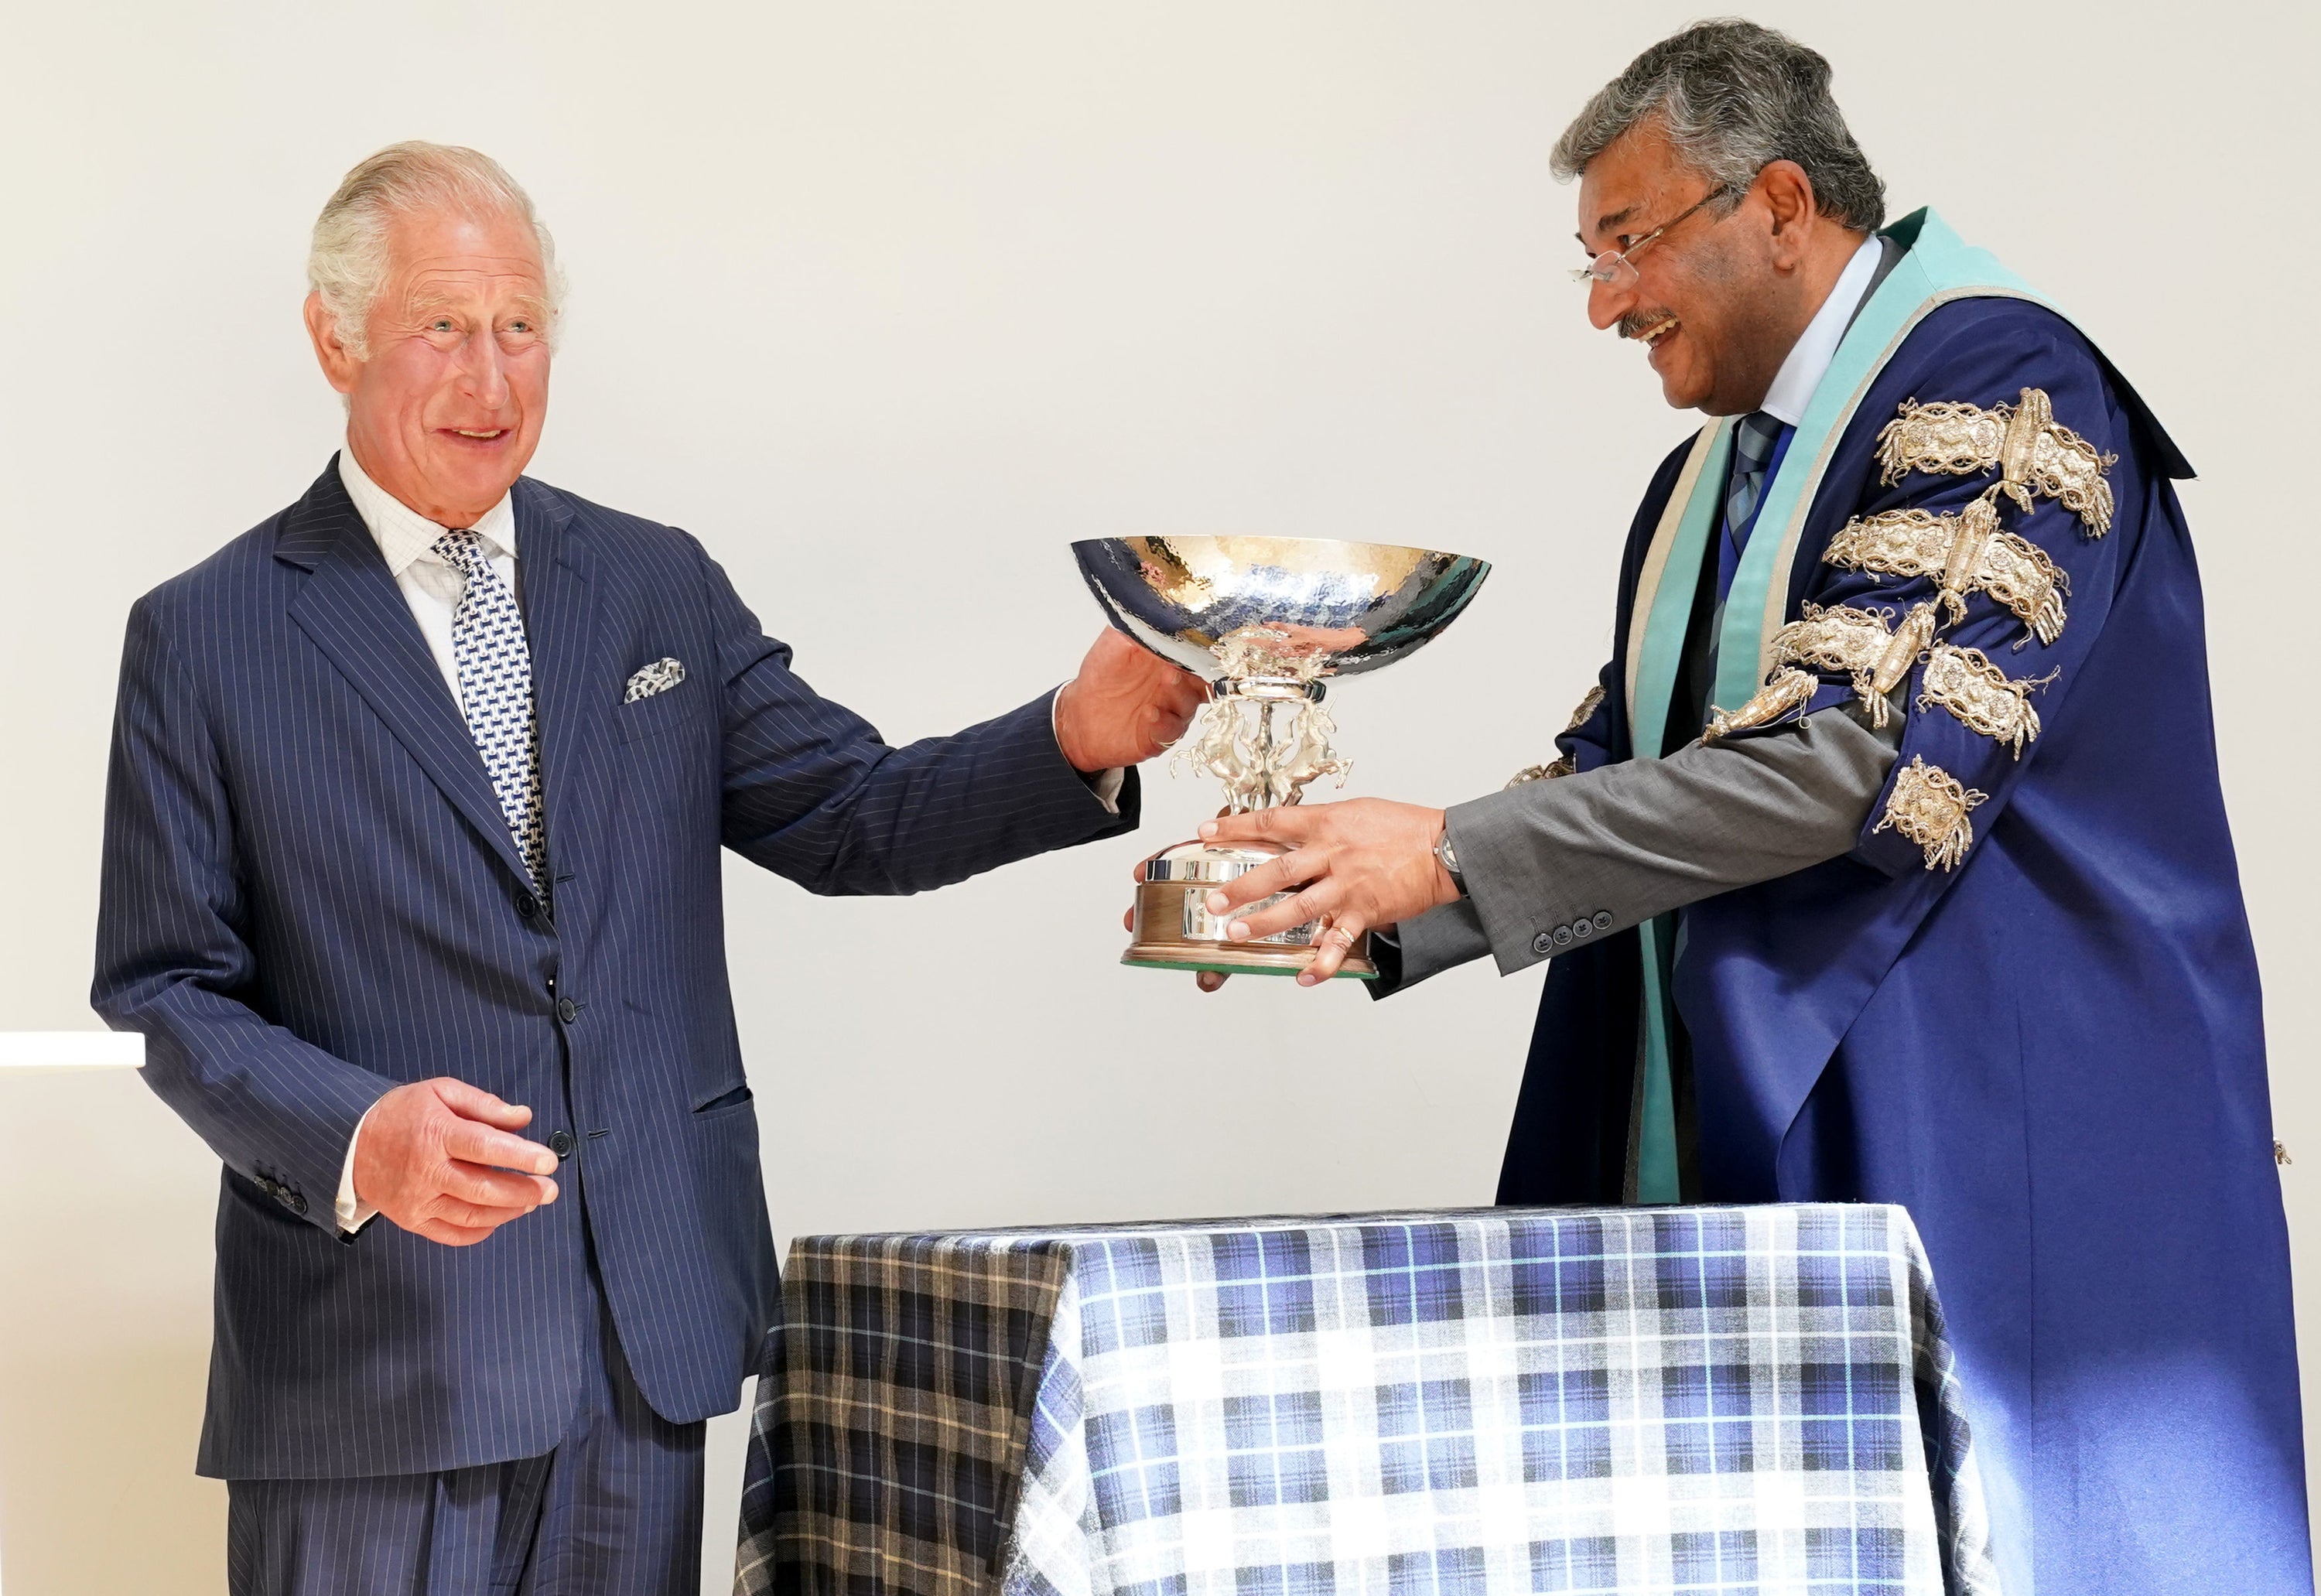 Charles is presented with a commemorative bowl during his visit (Jane Barlow/PA)